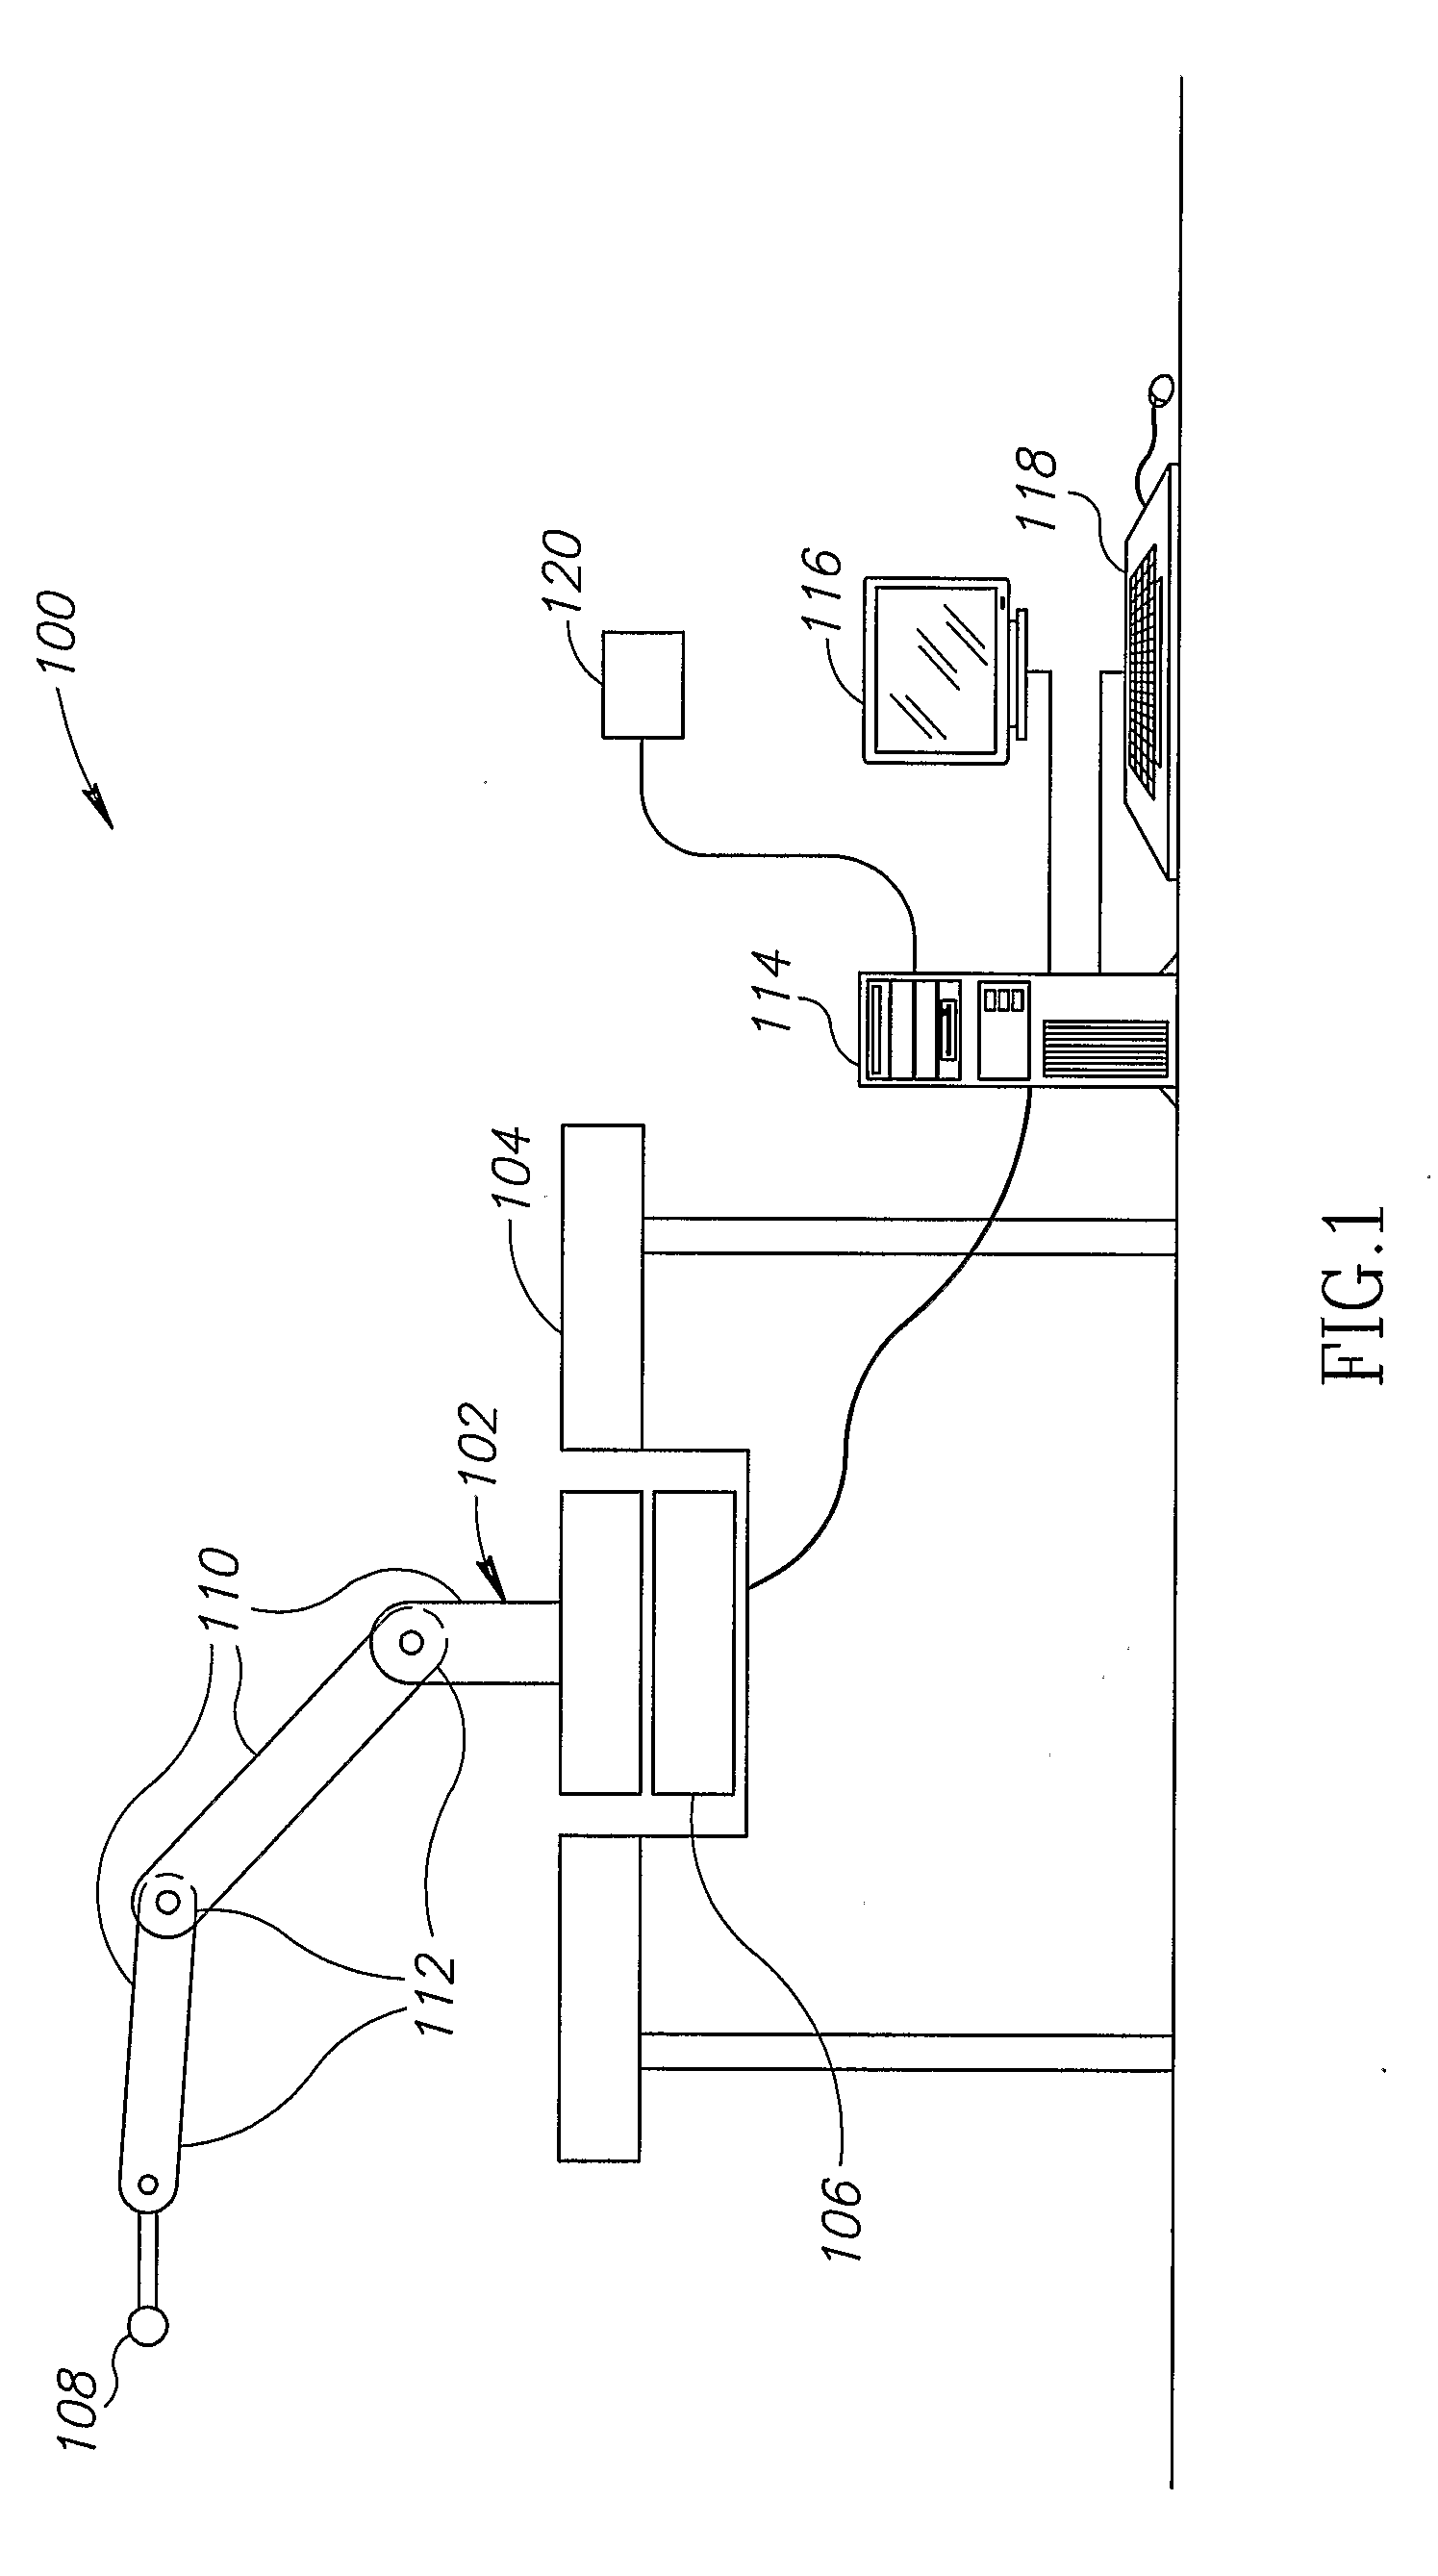 Methods and Apparatus for Rehabilitation and Training